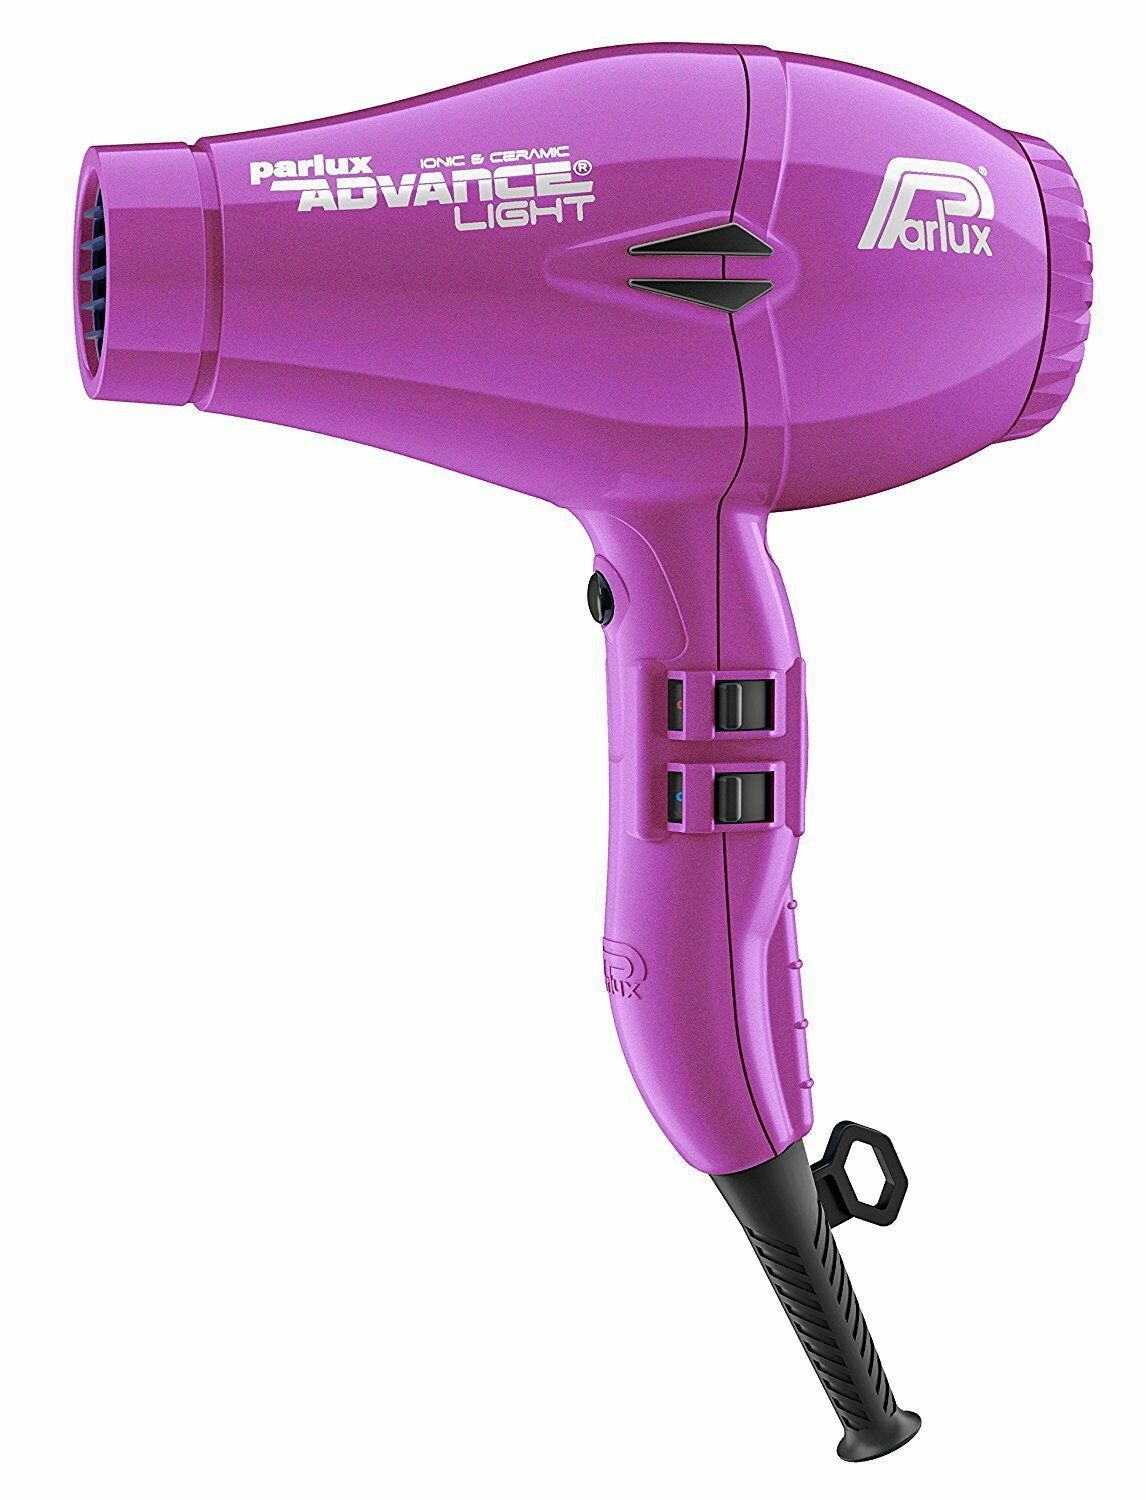 Parlux advance light purple hair dryer ionic professional 2200w 3 metres cable